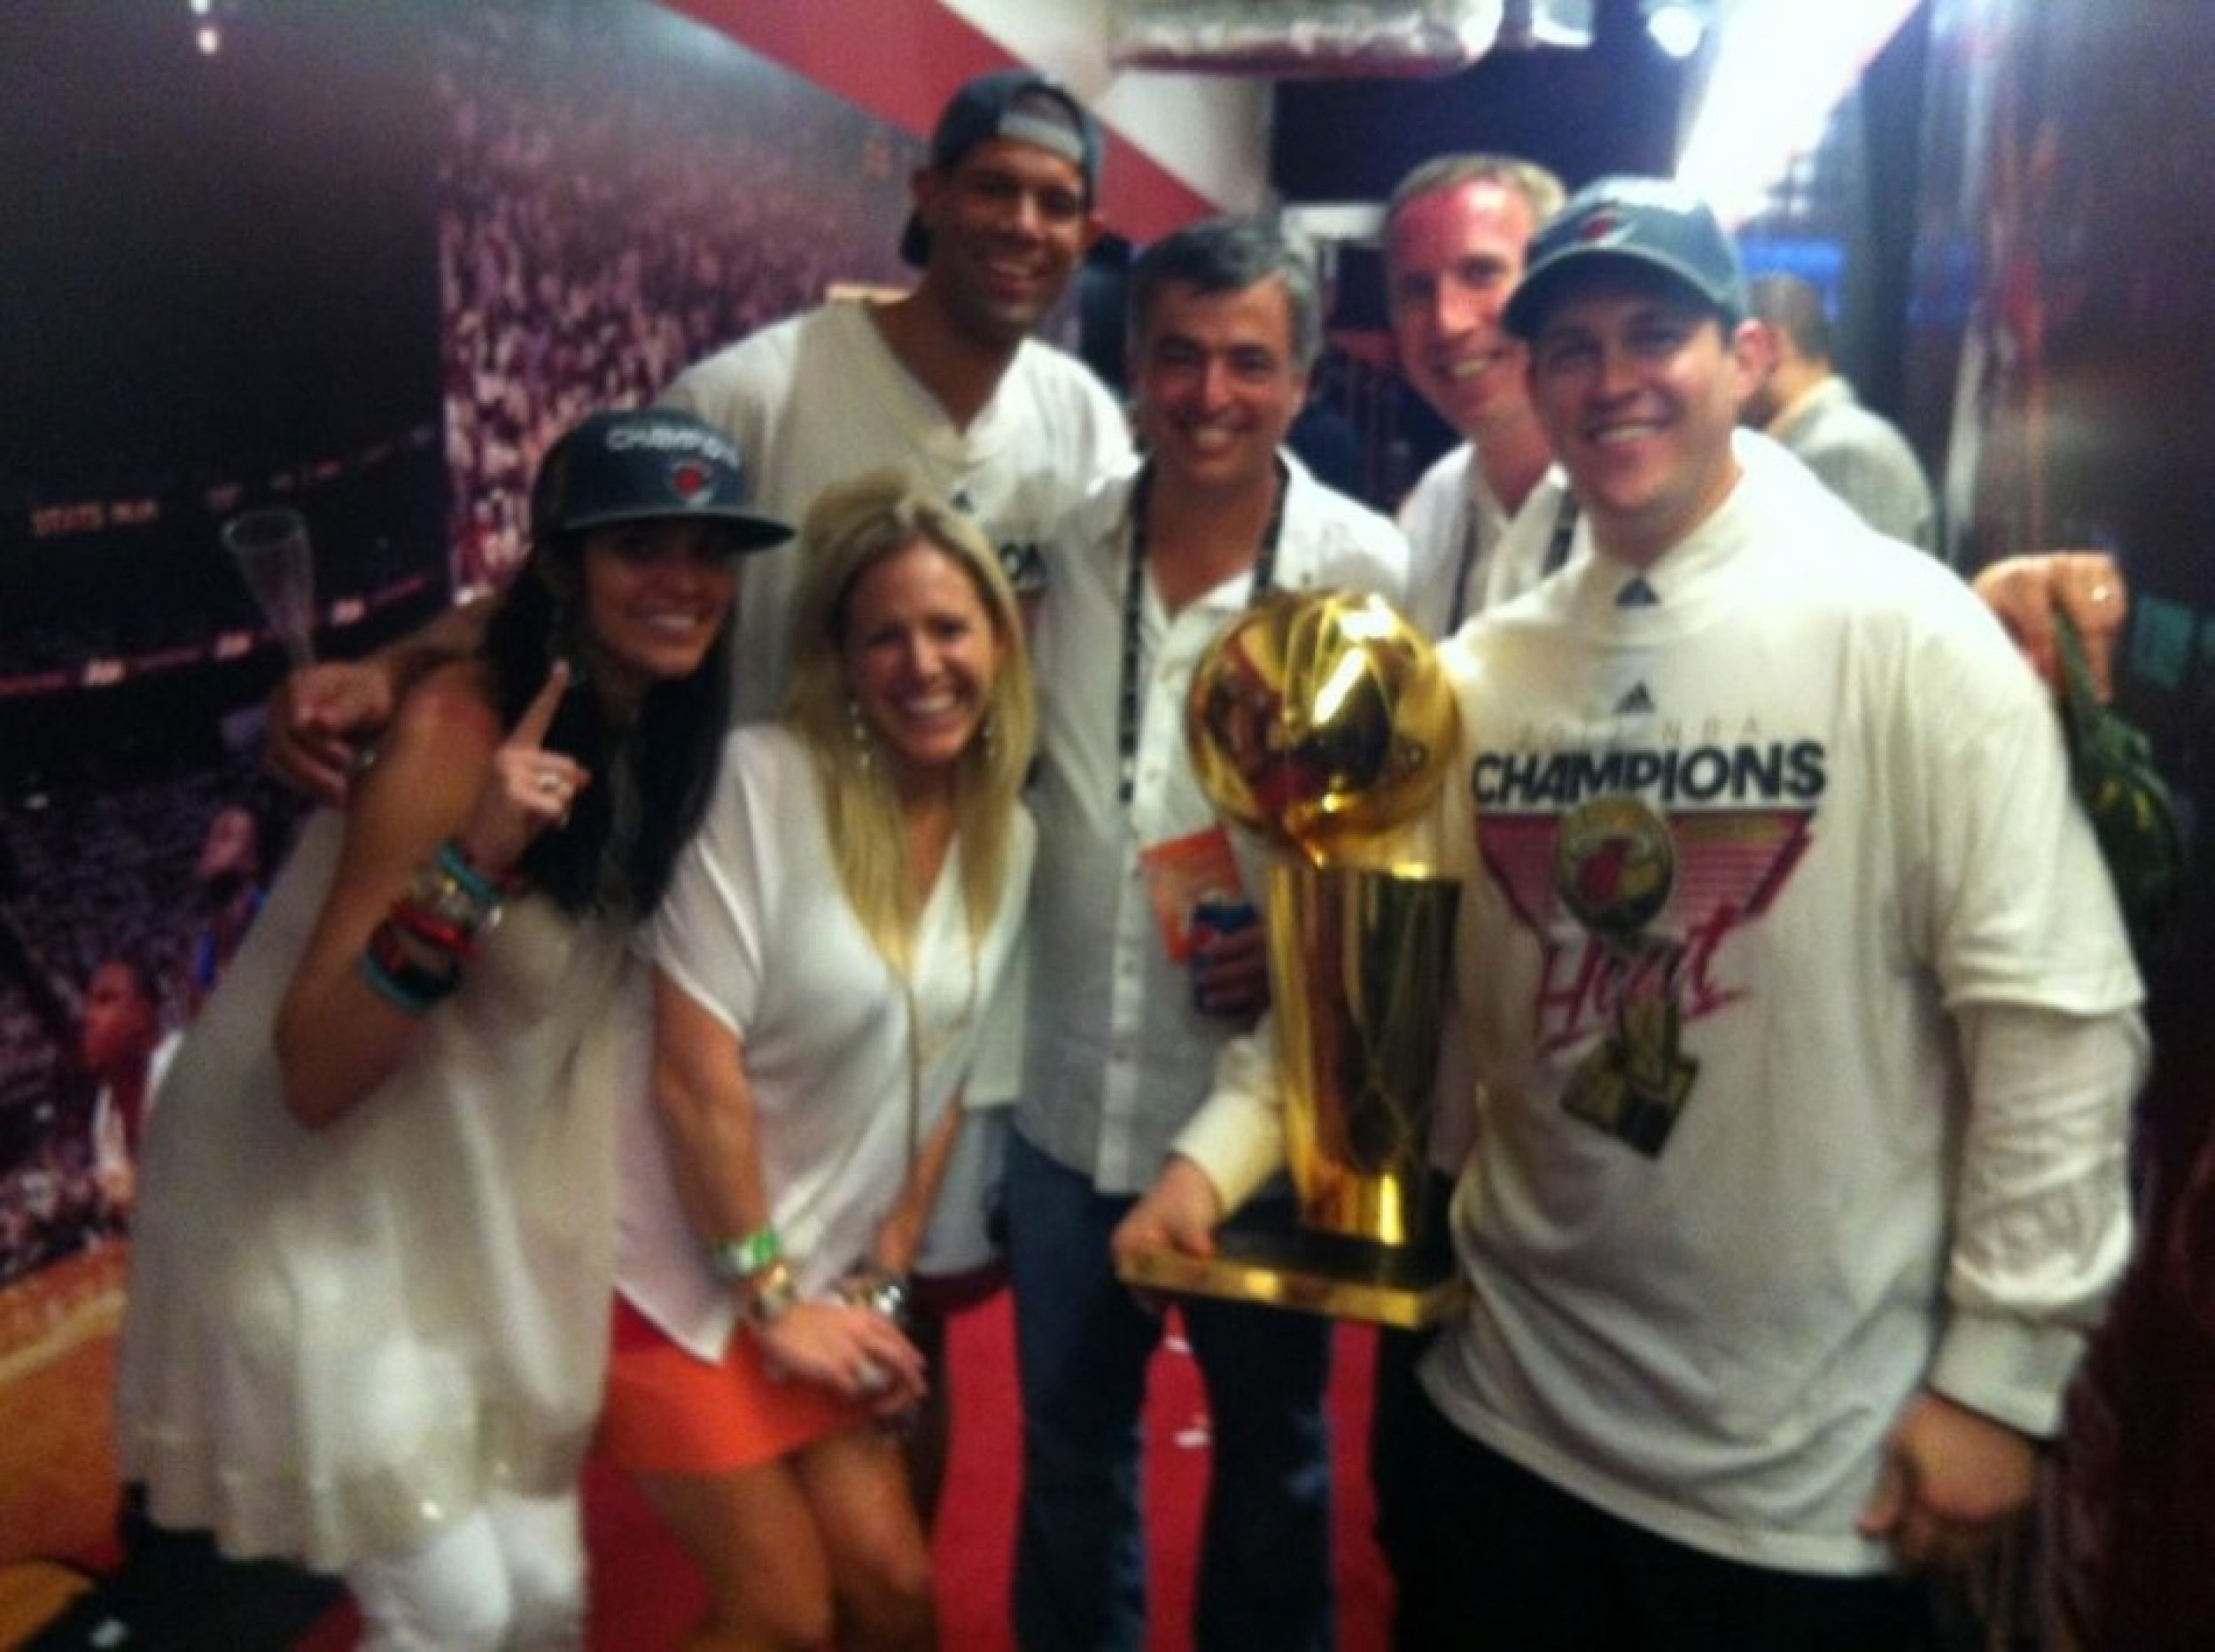 Apple Exec Caught Celebrating With Miami Heat Players After Winning NBA Championship PHOTO